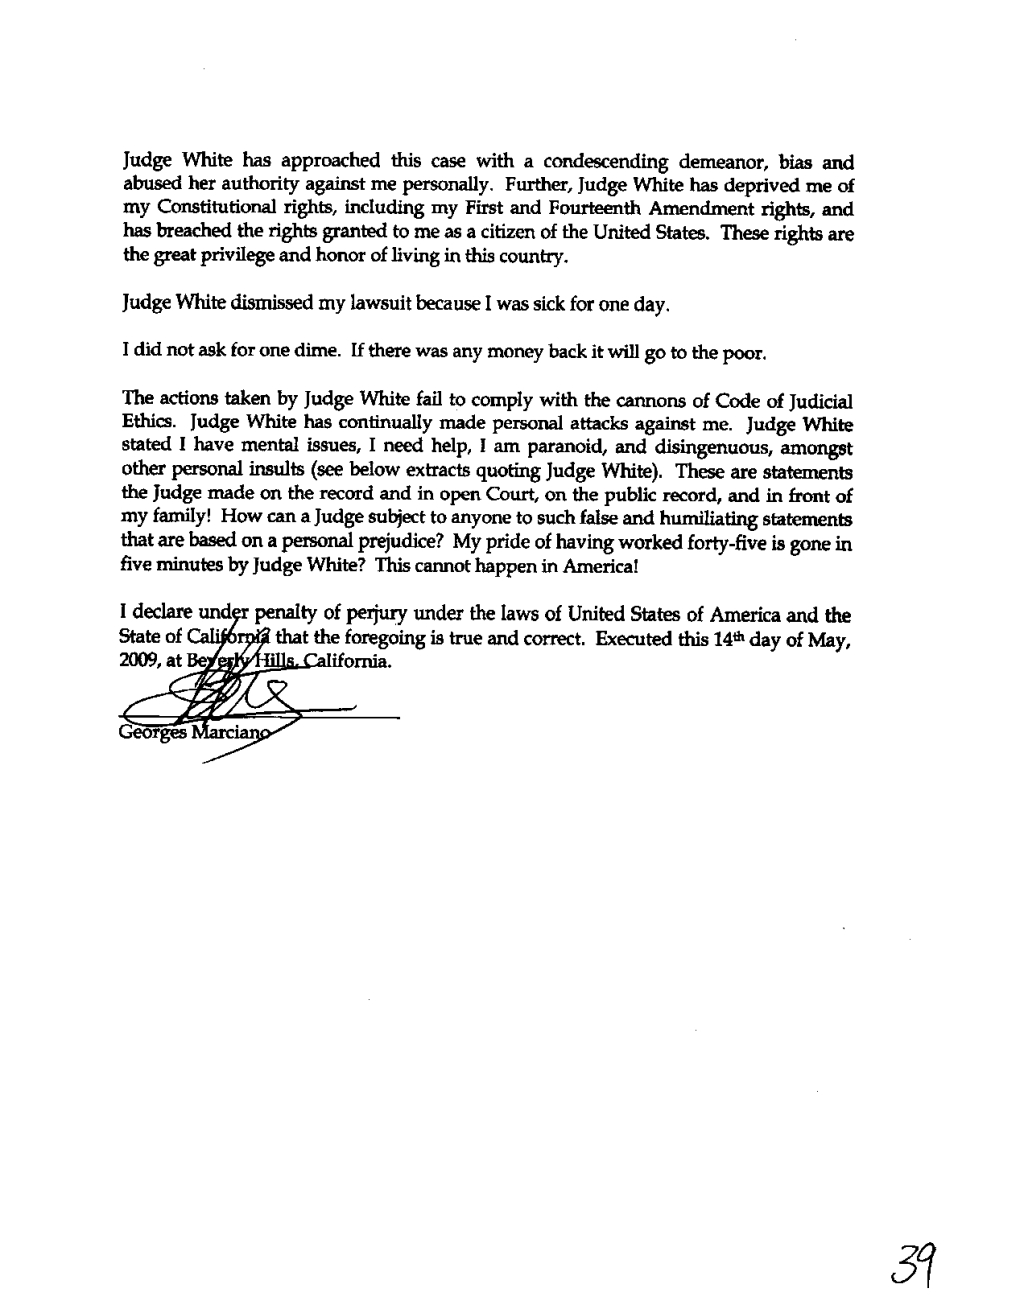 full complaint judge white for federal with exhibits_1_page30